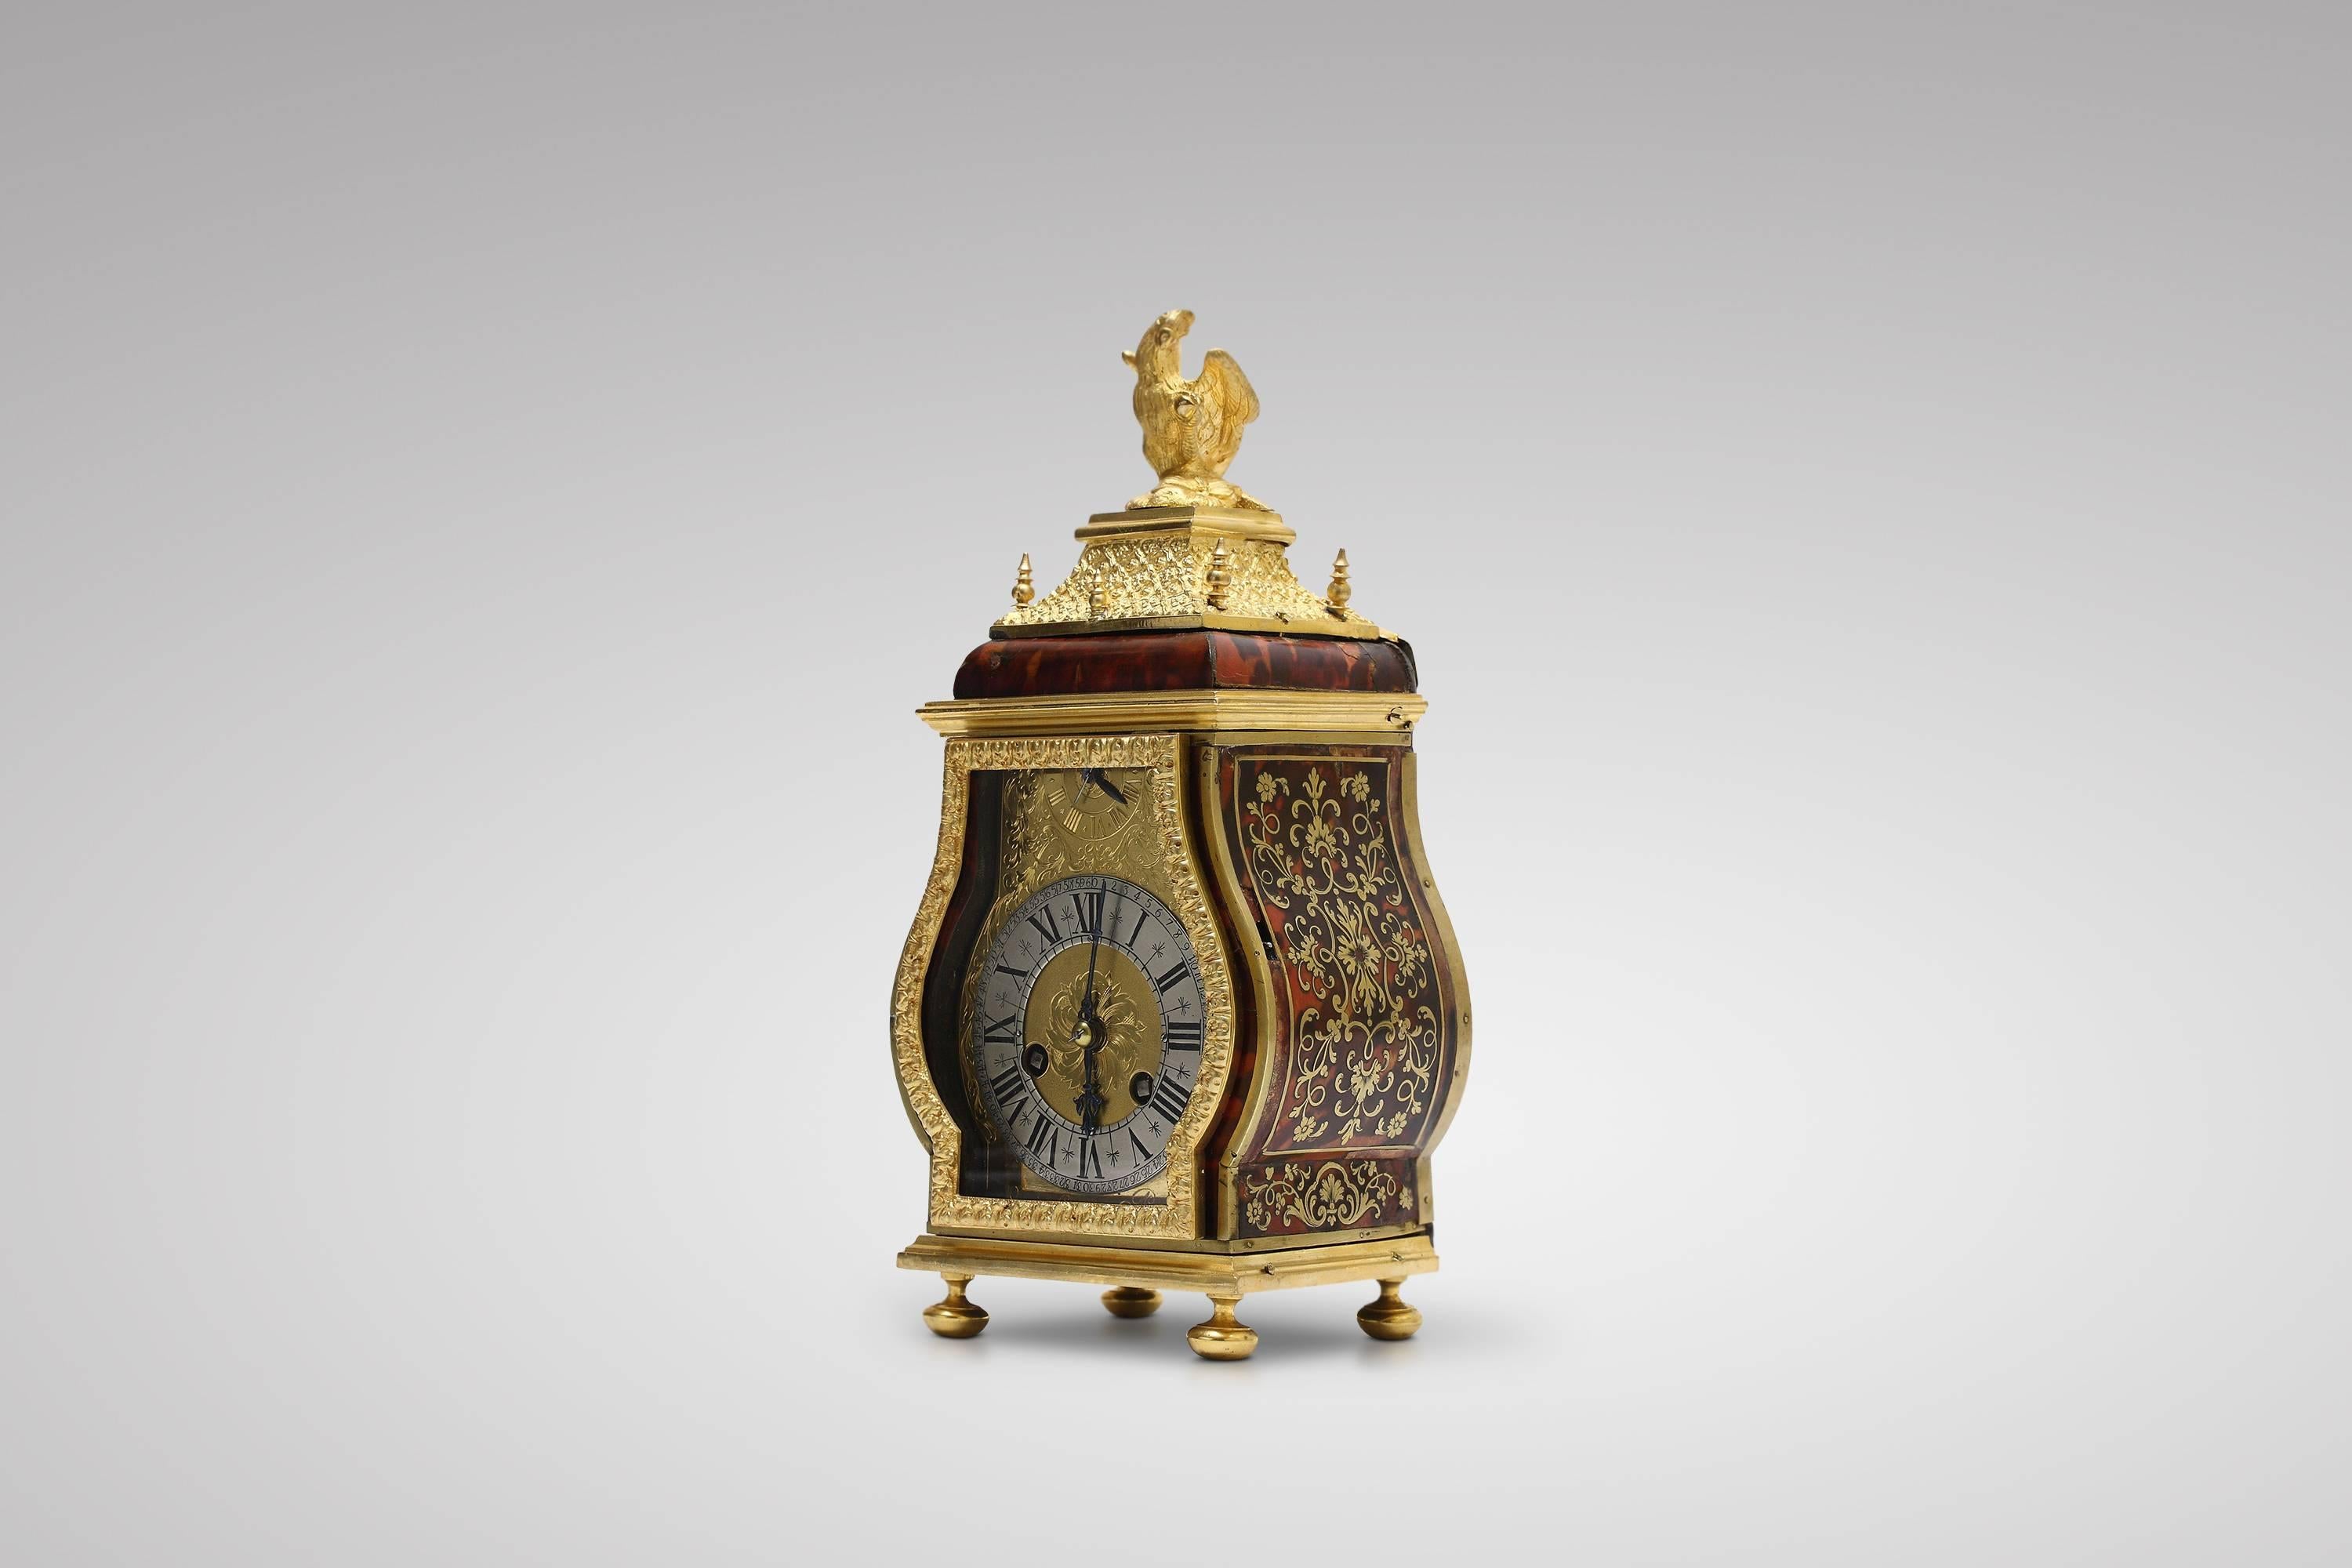 Very fine and small portable clock in turtleshell and brass veneer with ormolu decorations applied, signed Louis Ourry à Paris on the dial and the backplate. Very finely engraved and gilt dial with silvered chapter ring and blued steel hands.